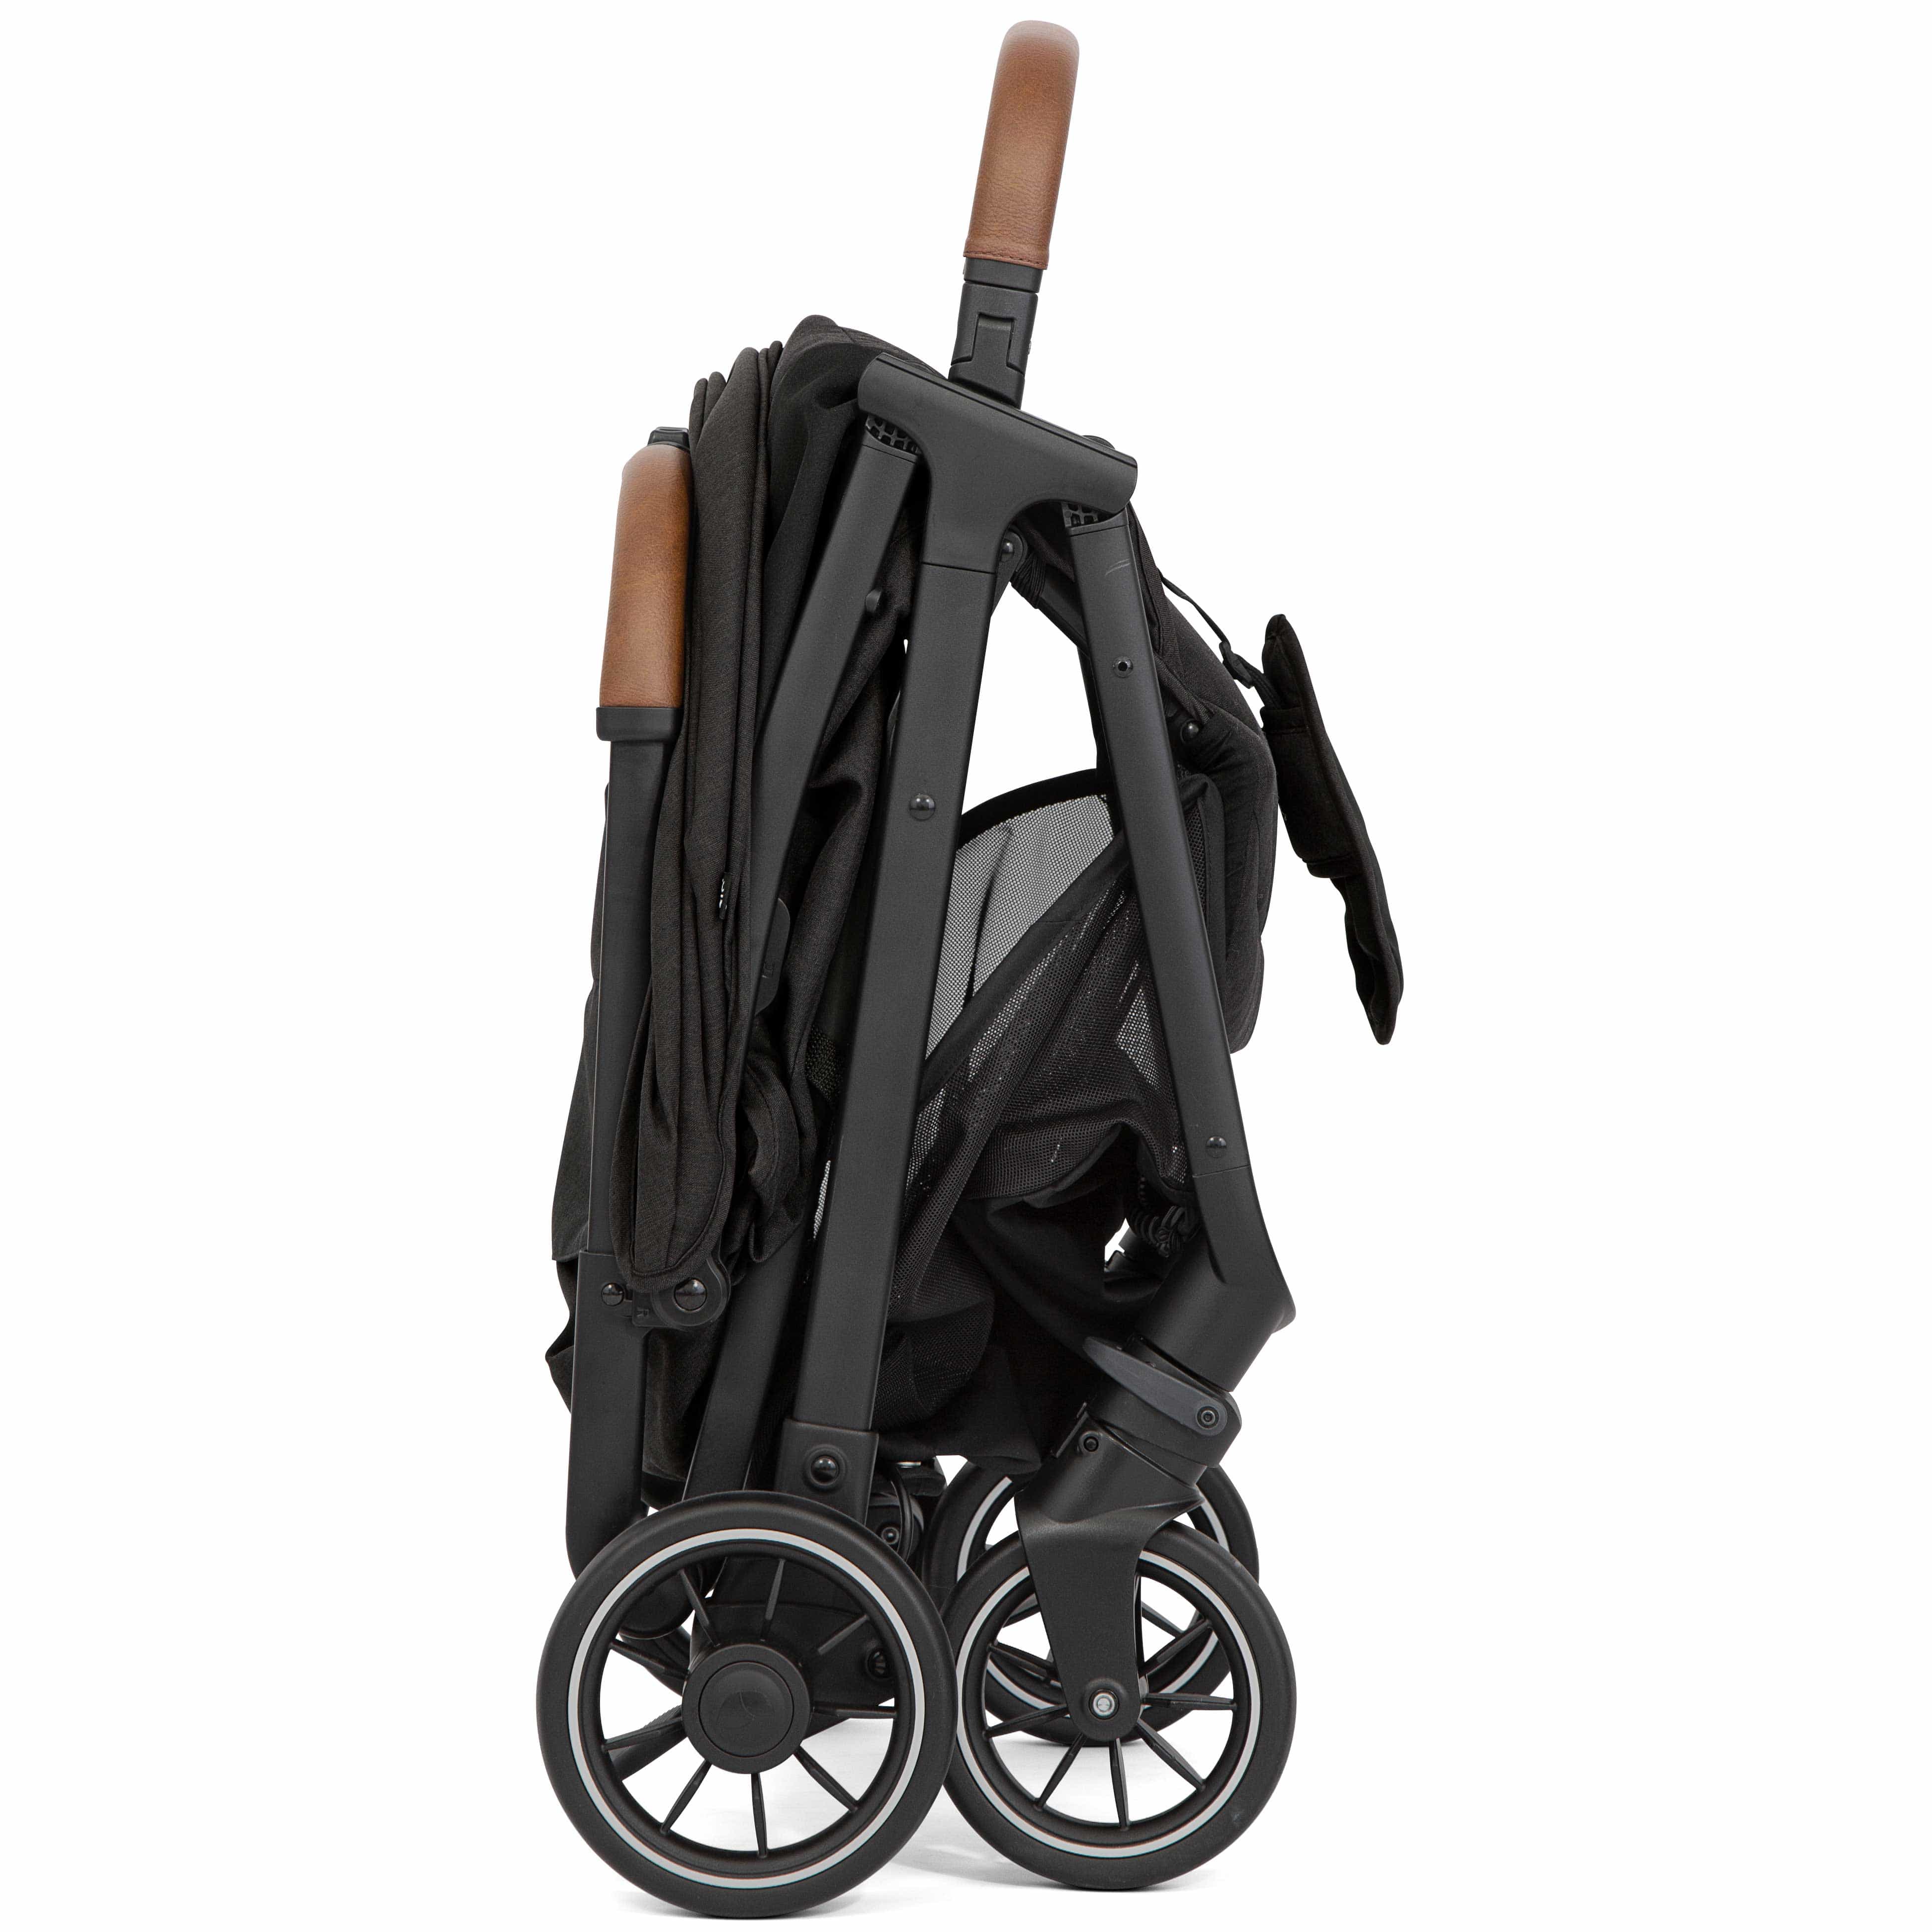 Joie Pact Pro Stroller in Shale Pushchairs & Buggies S2308AASHA000 5056080617954